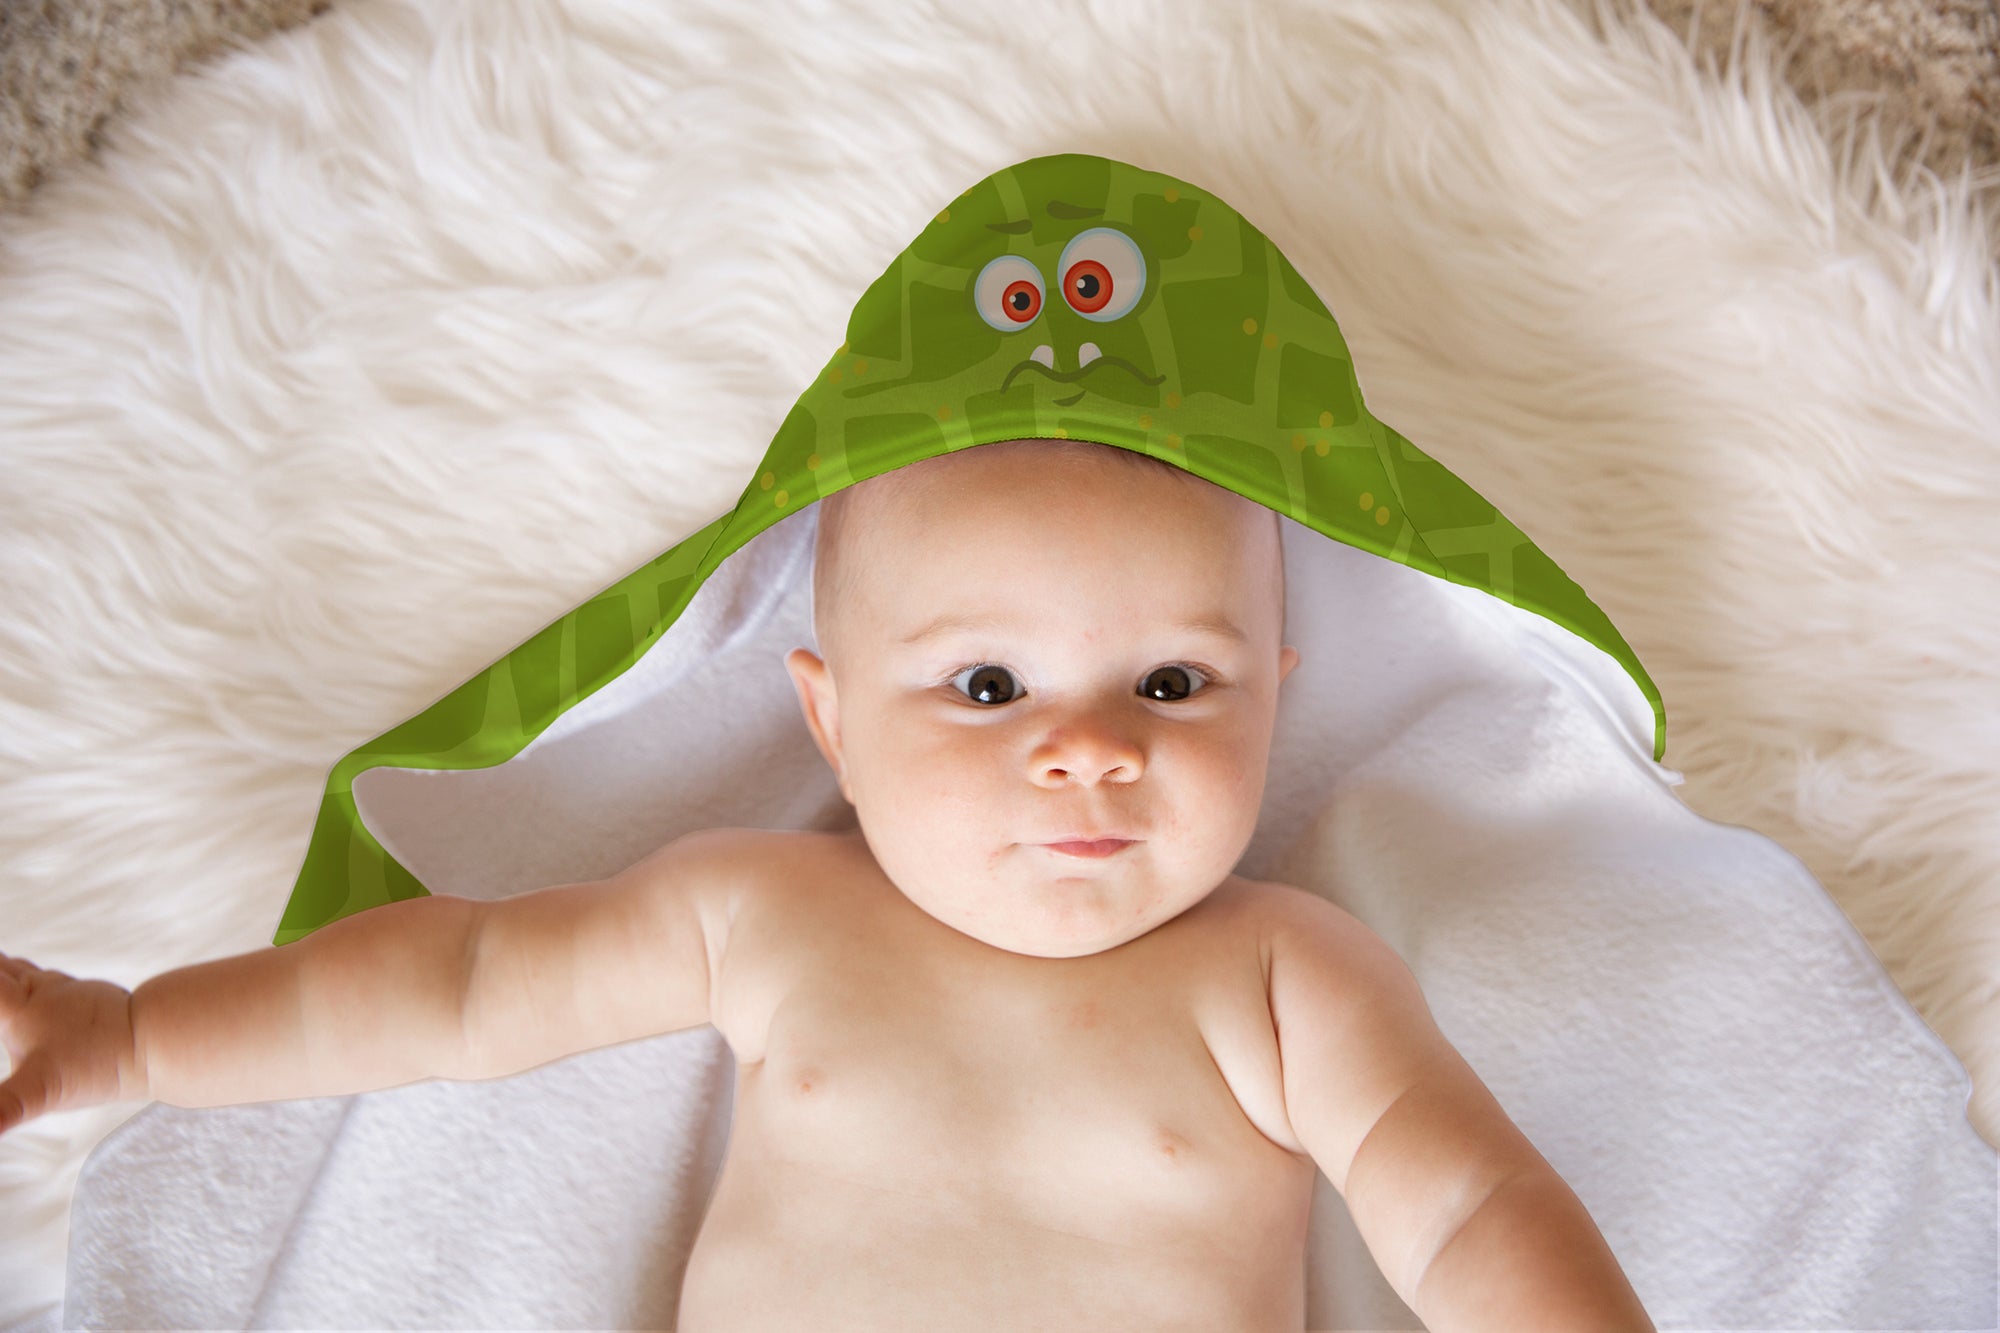 Buy this Green Monster Soft and Absorbent Hooded Baby Towel